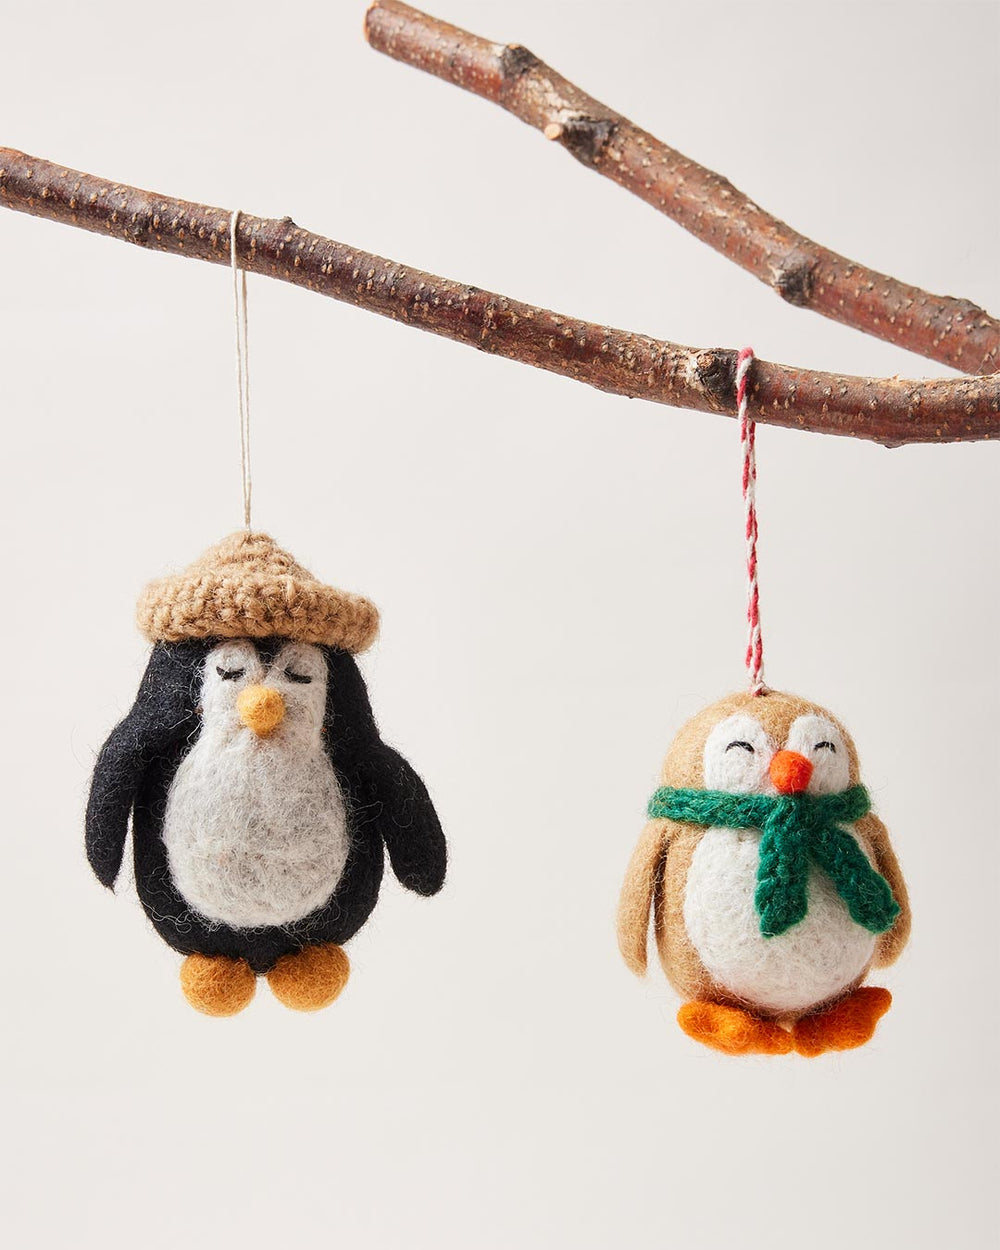 penguin christmas tree, Penguin Christmas Tree, For the Home, Pinterest